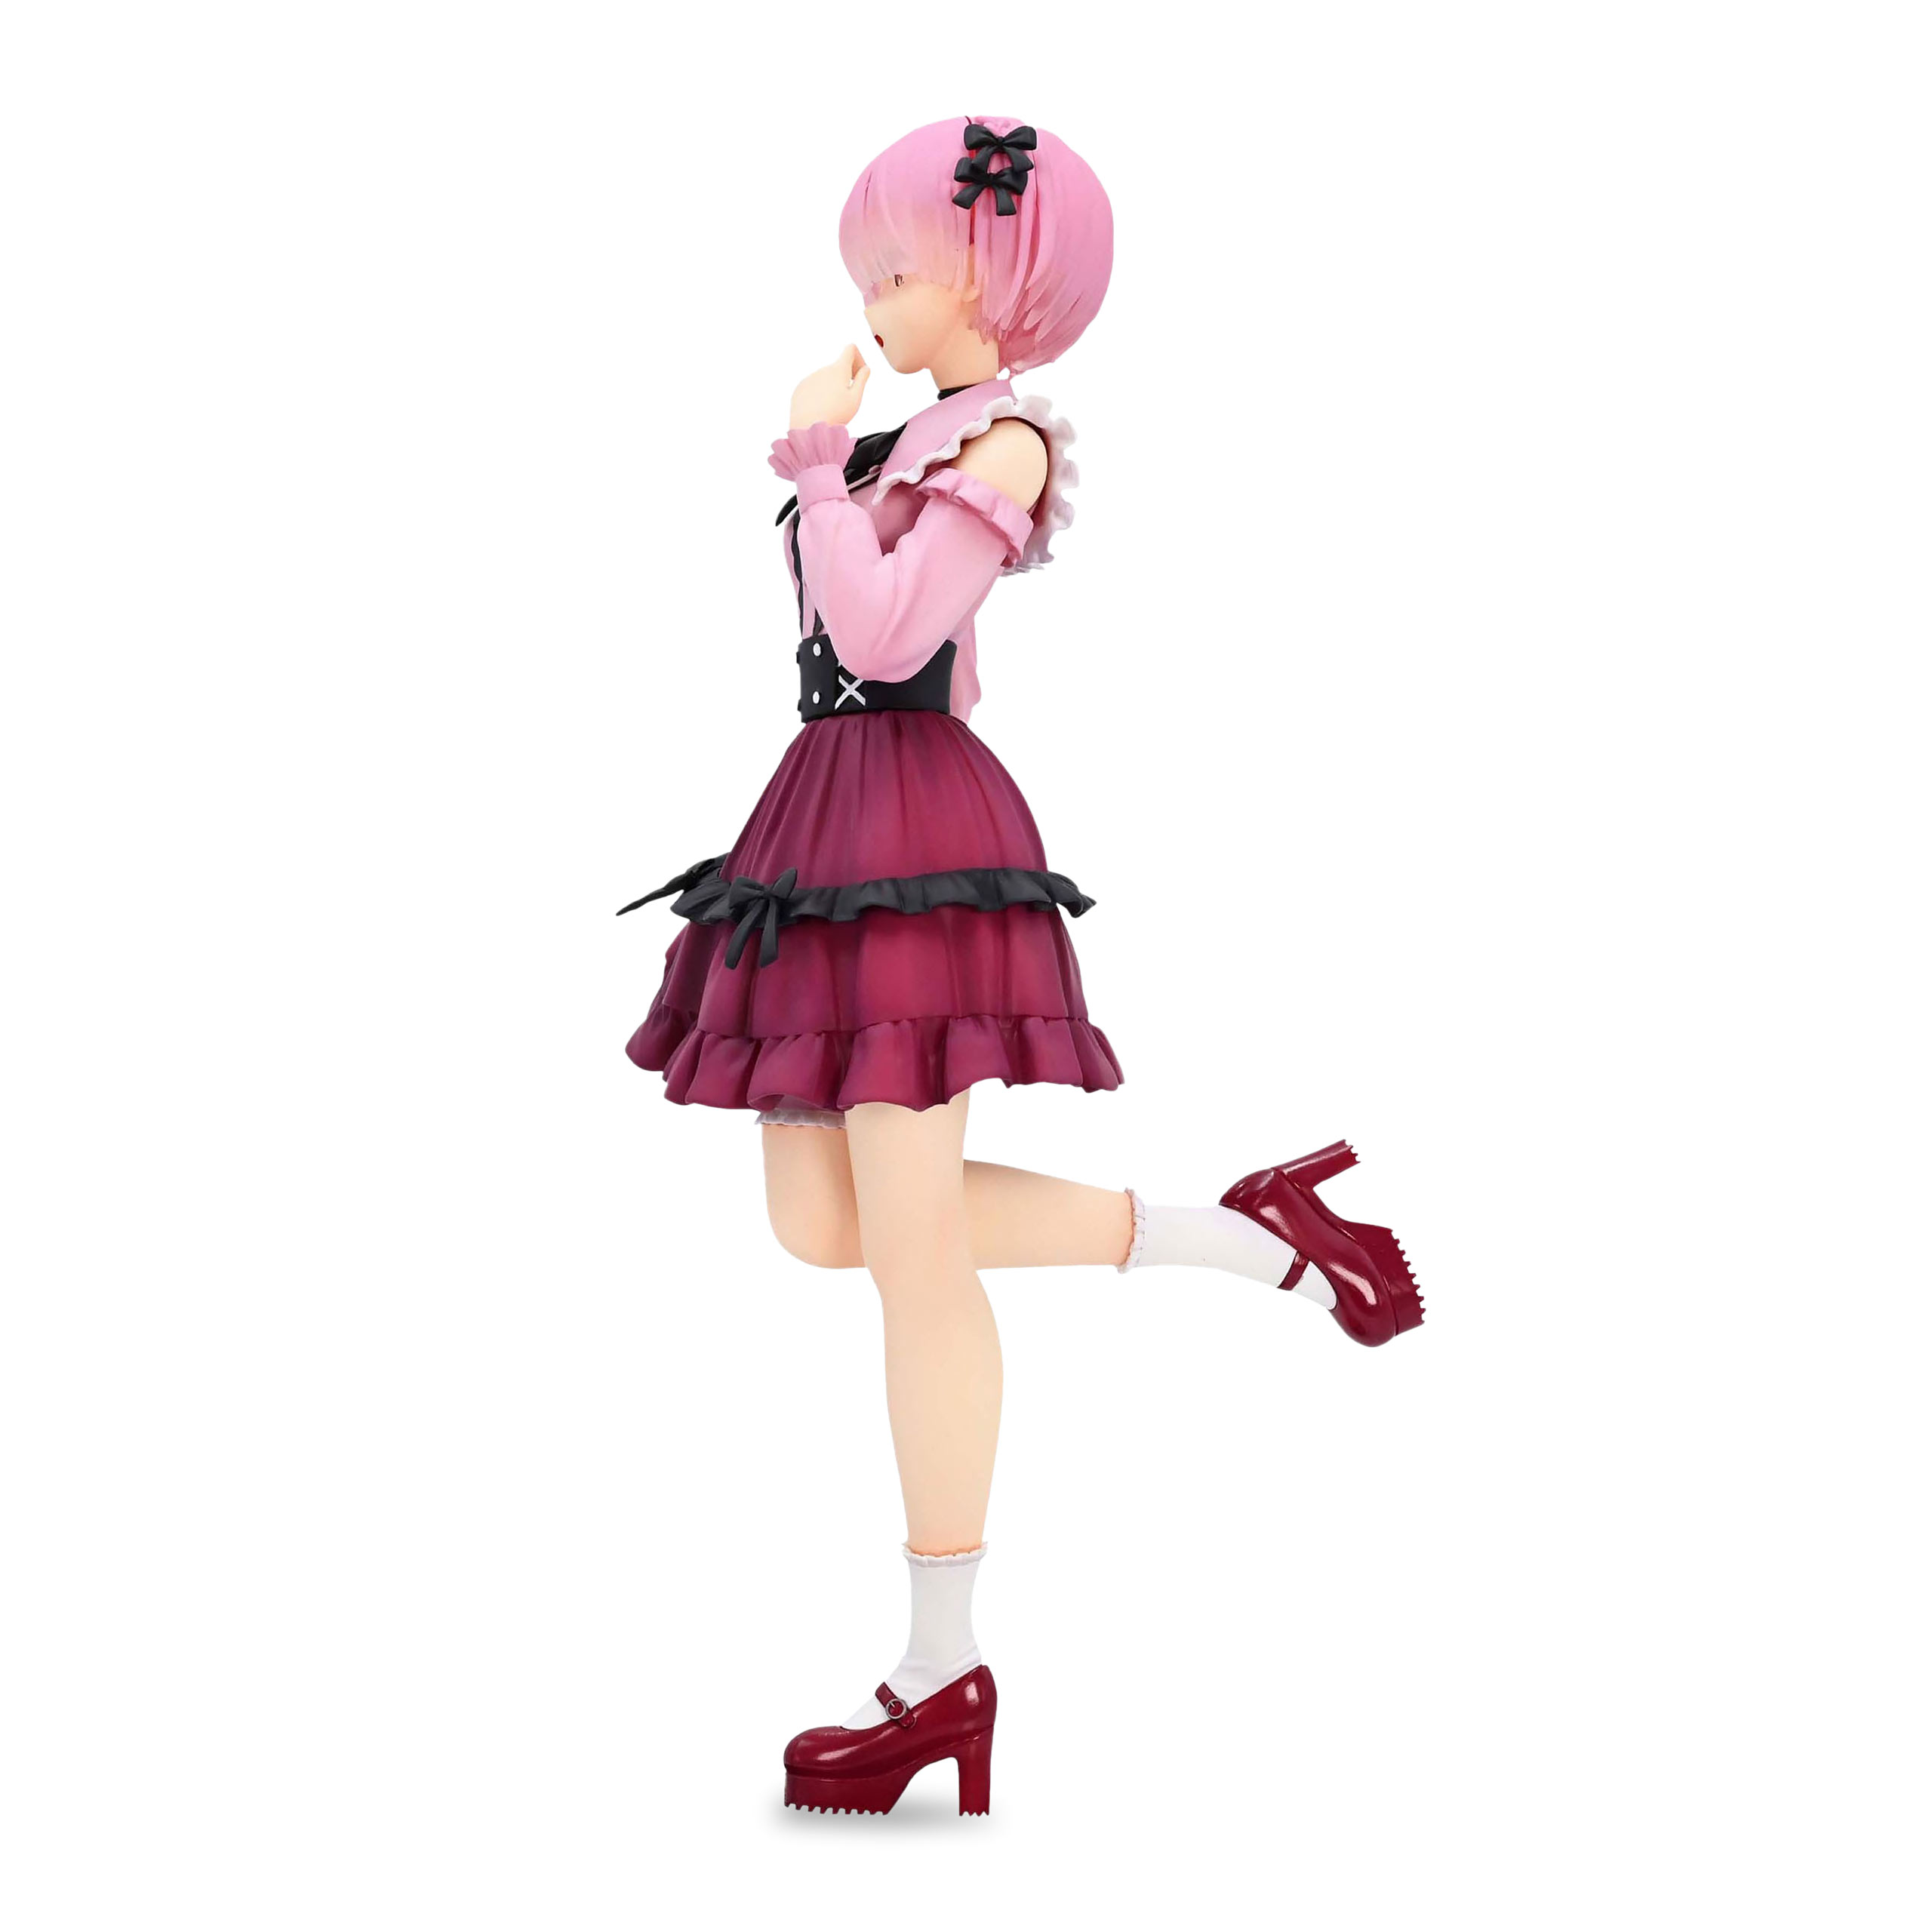 Re:Zero - Ram Girly Outfit Pink Figure